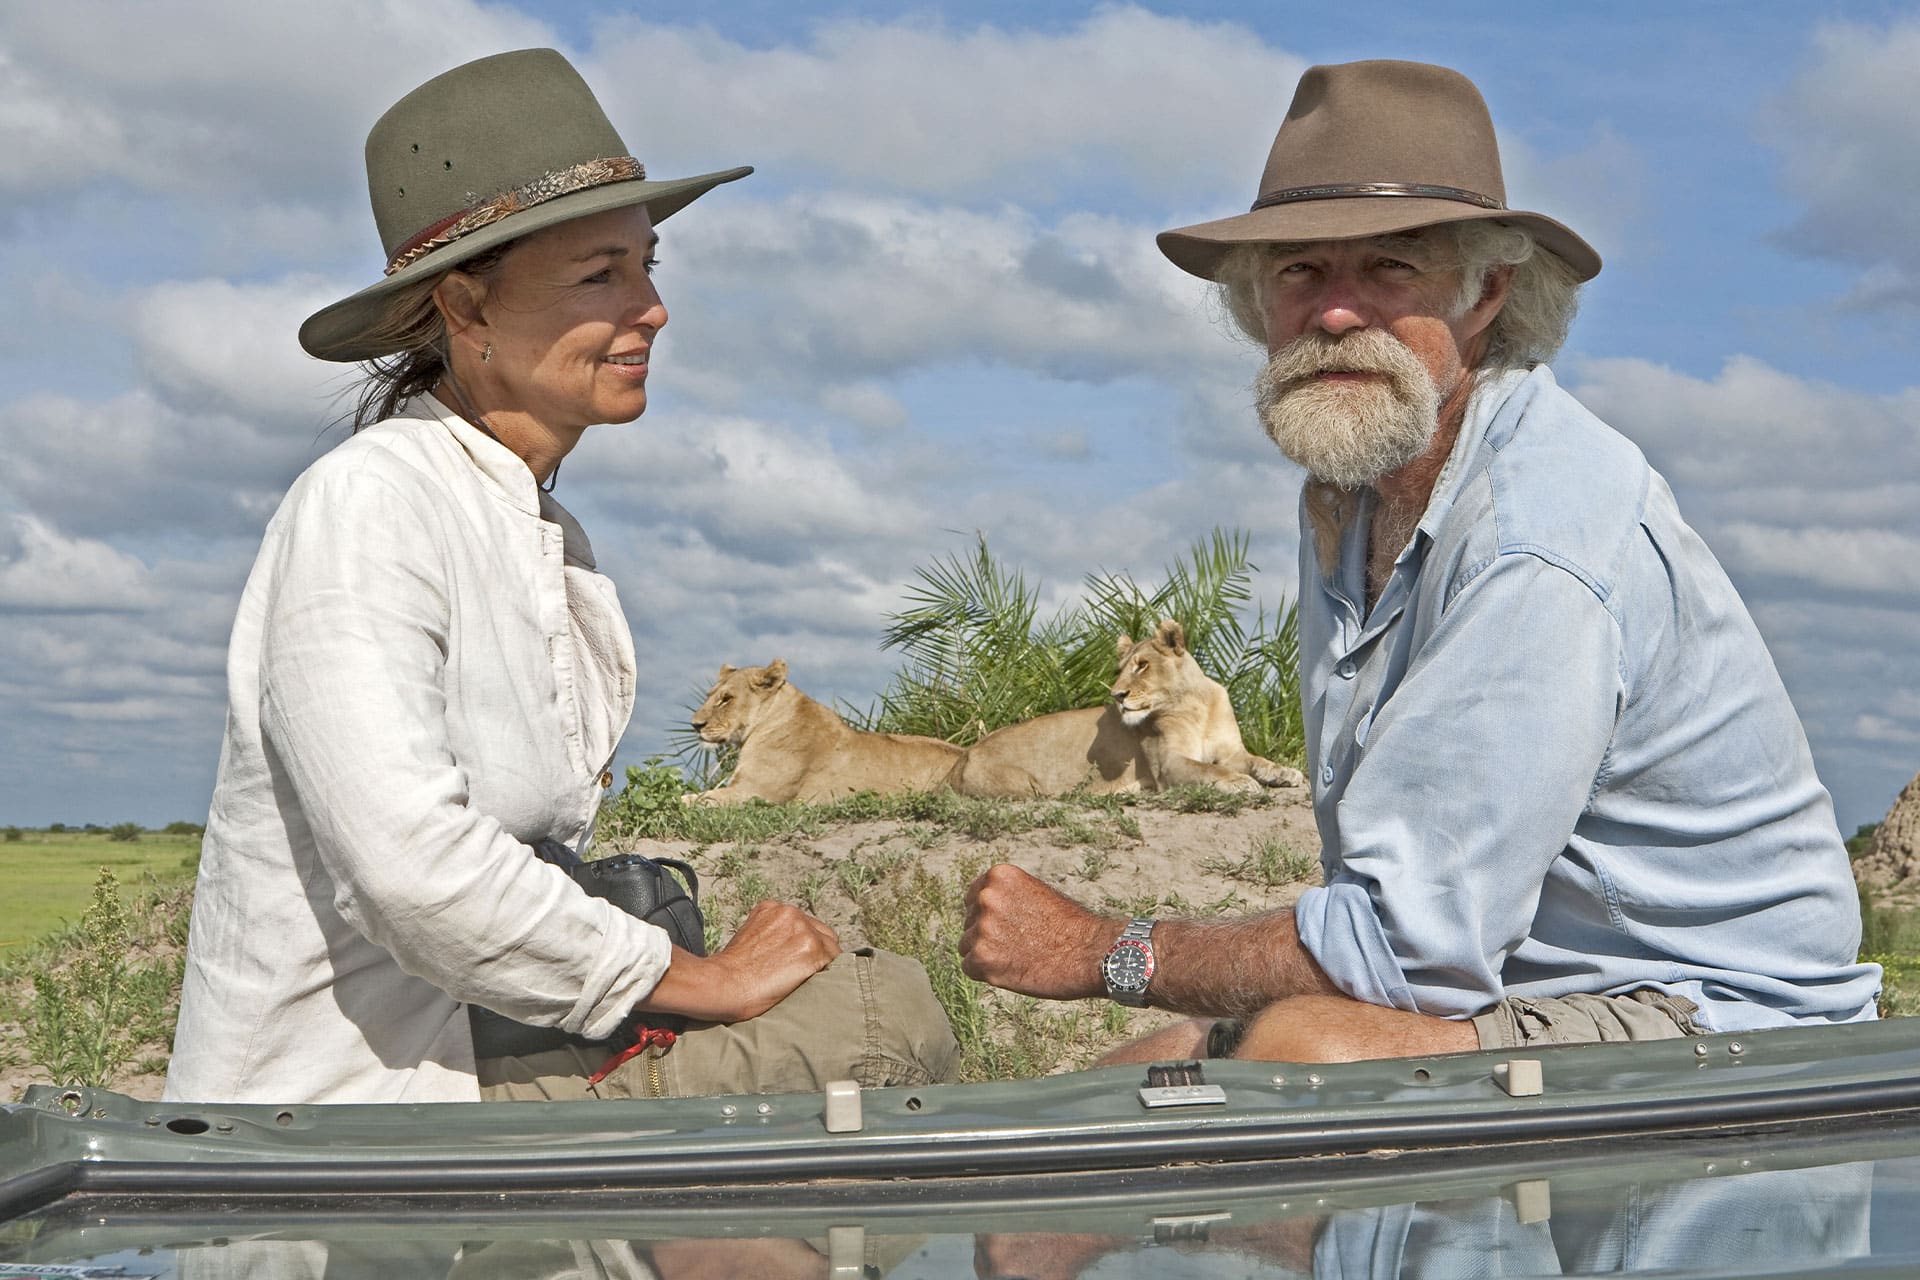 Dereck and Beverly Joubert posing with two female lions in the background.